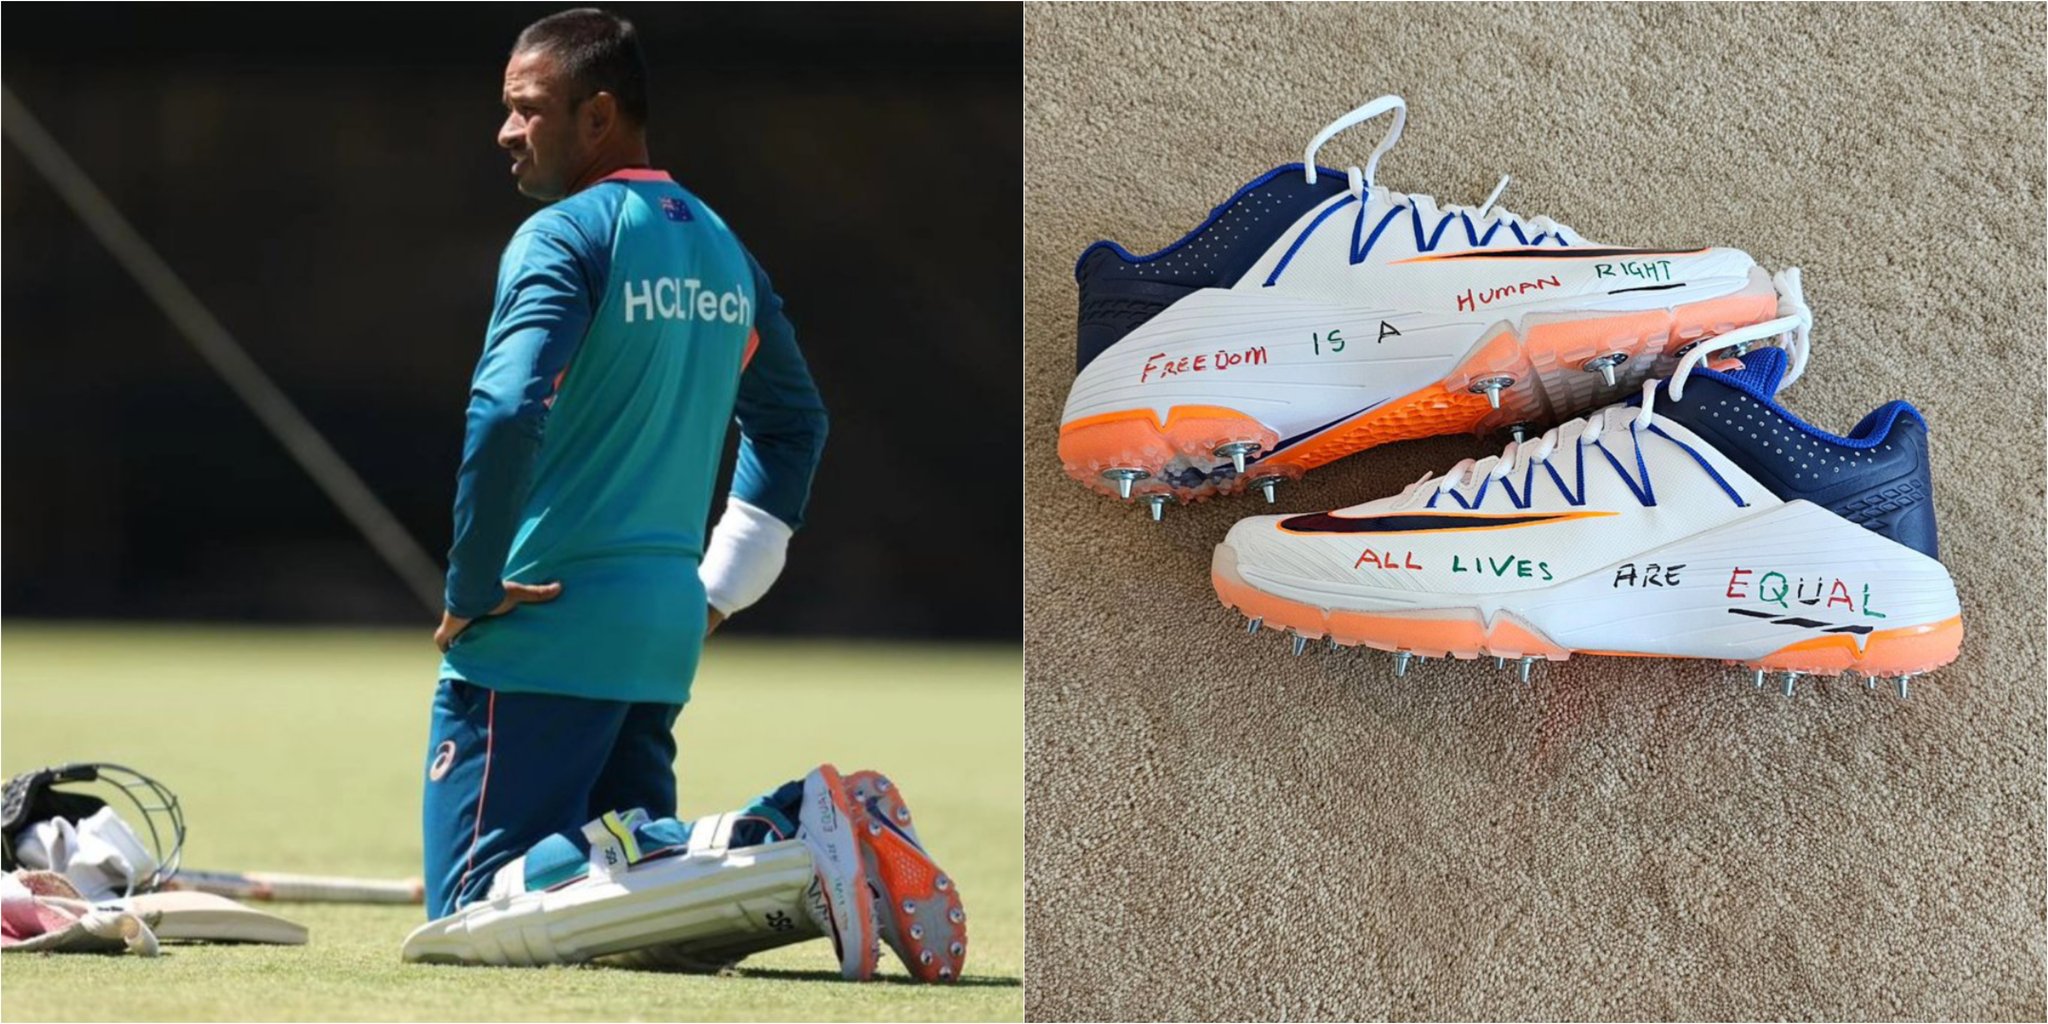 Usman Khawaja Request for Peace Sign on Bat, Shoes Declined by ICC